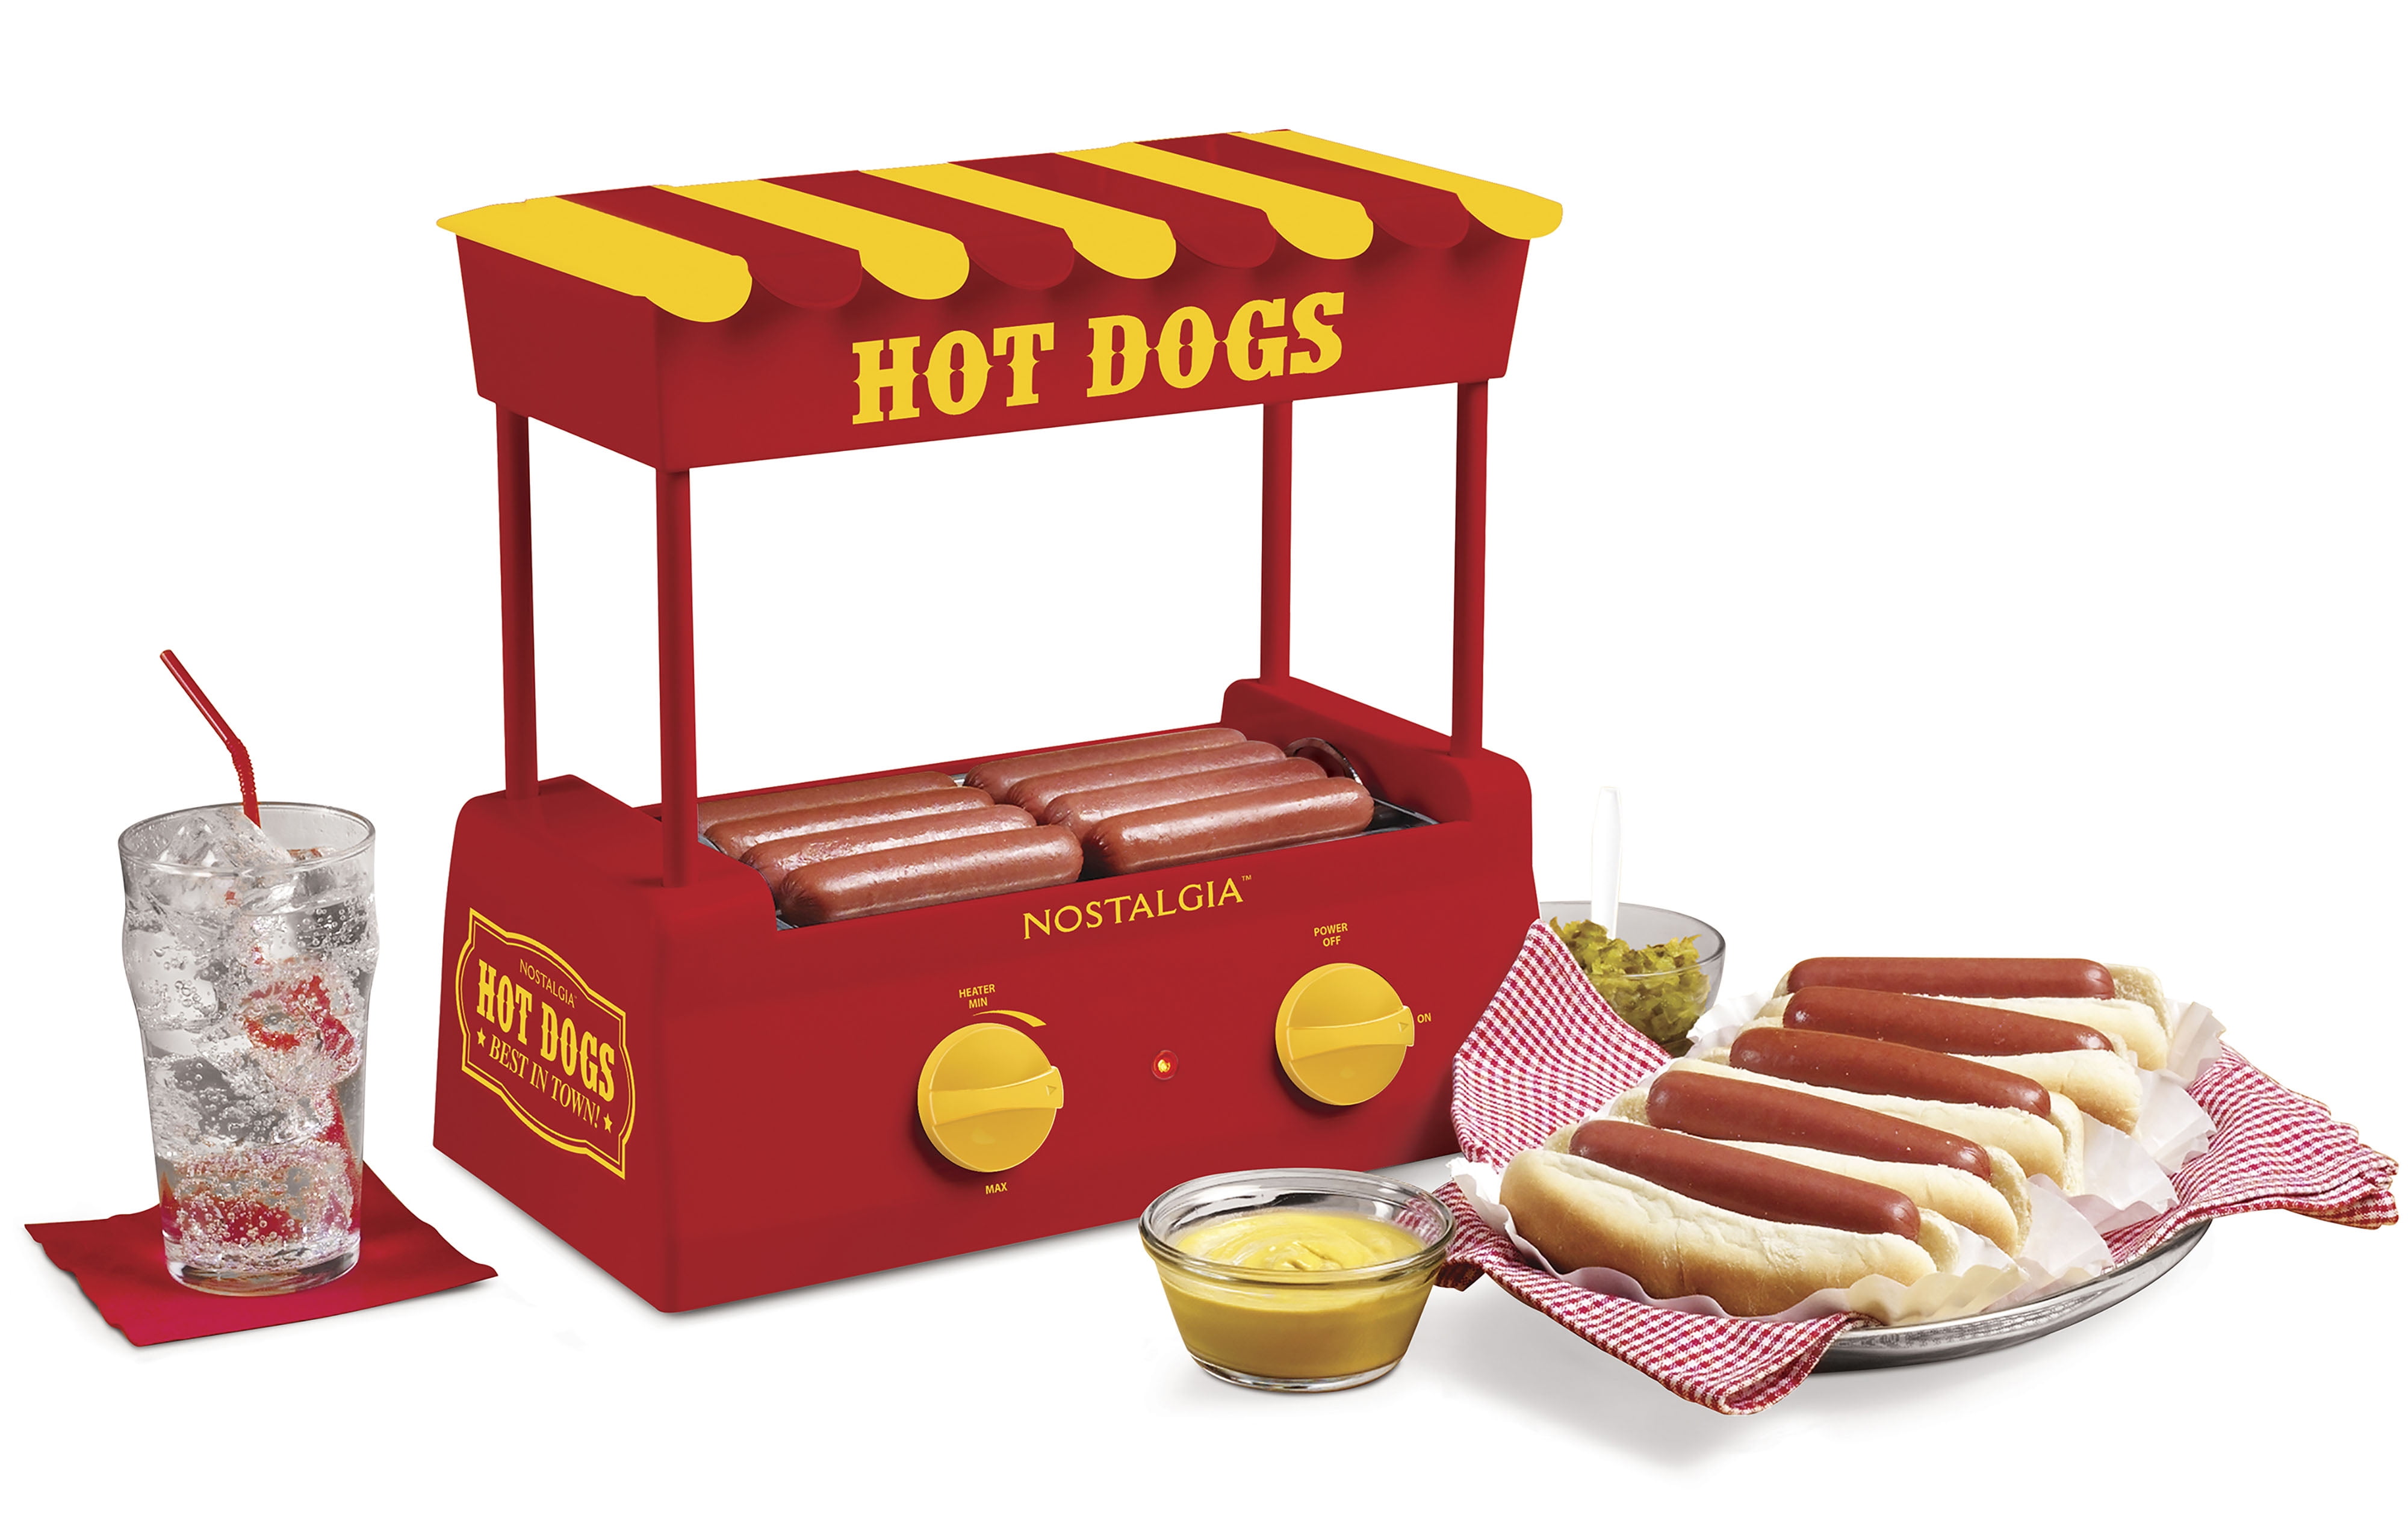 4 Foot Long and 6 Bun Capacity Retro Red Taquitos Nostalgia HDR8RR Hot Dog Warmer 8 Regular Sized Perfect For Breakfast Sausages Stainless Steel Rollers Brats Egg Rolls 